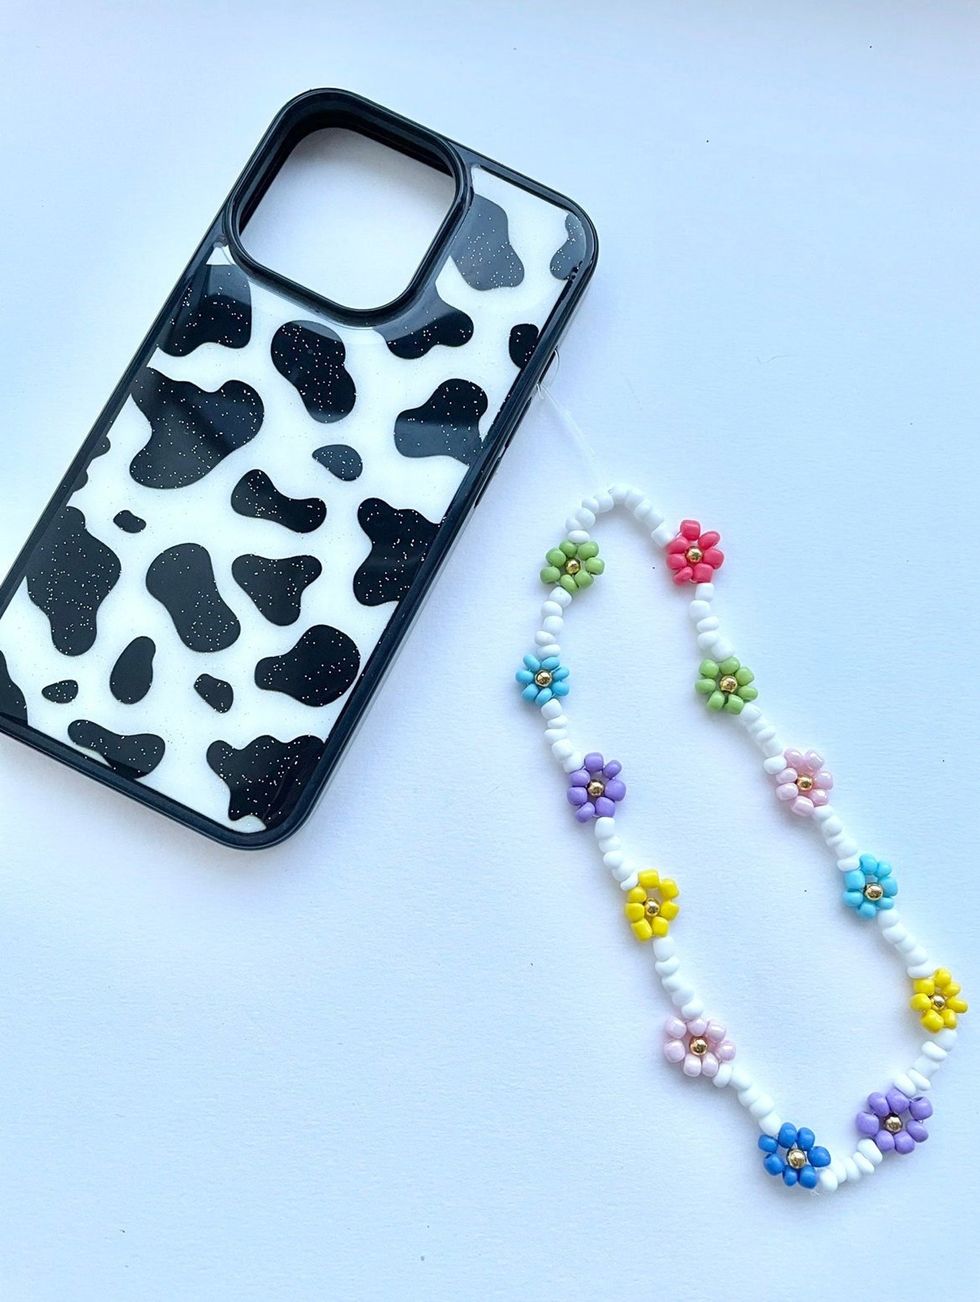 Best beaded phone charms and straps